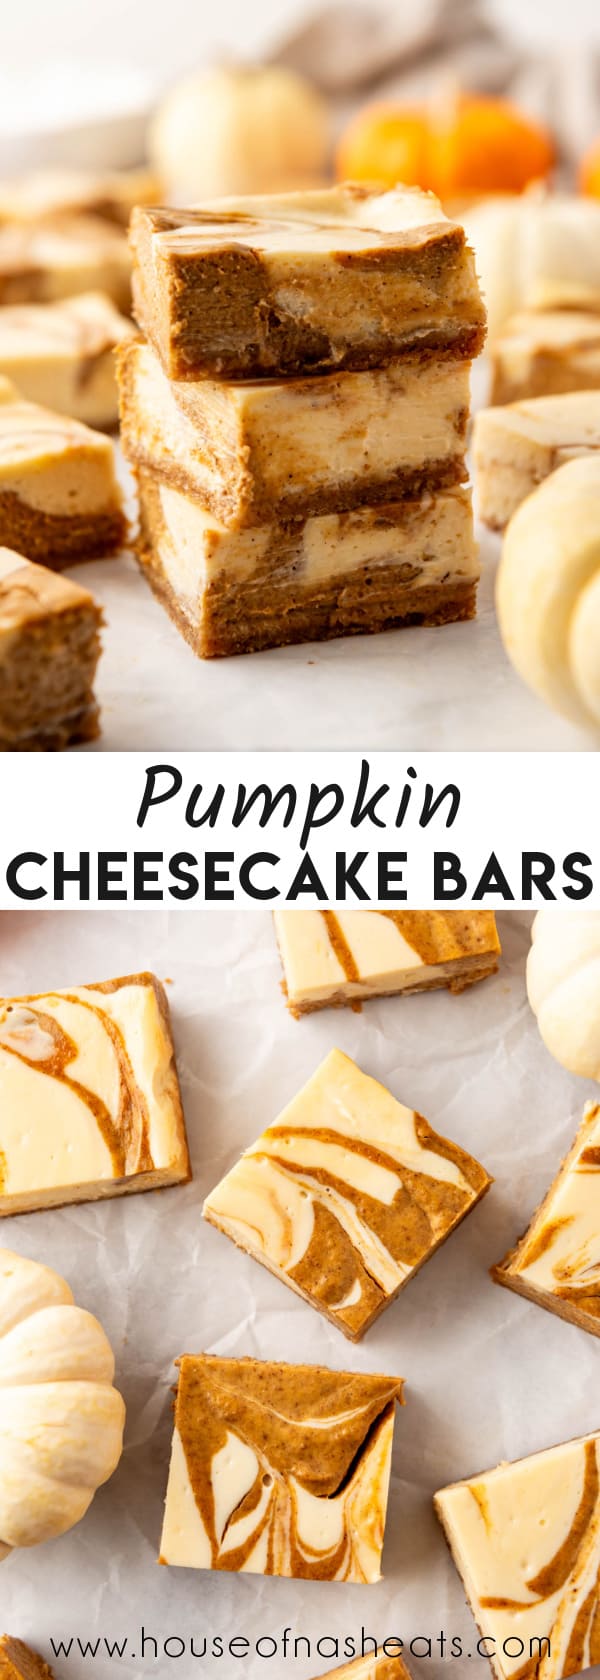 A collage of images of pumpkin cheesecake bars with text overlay.